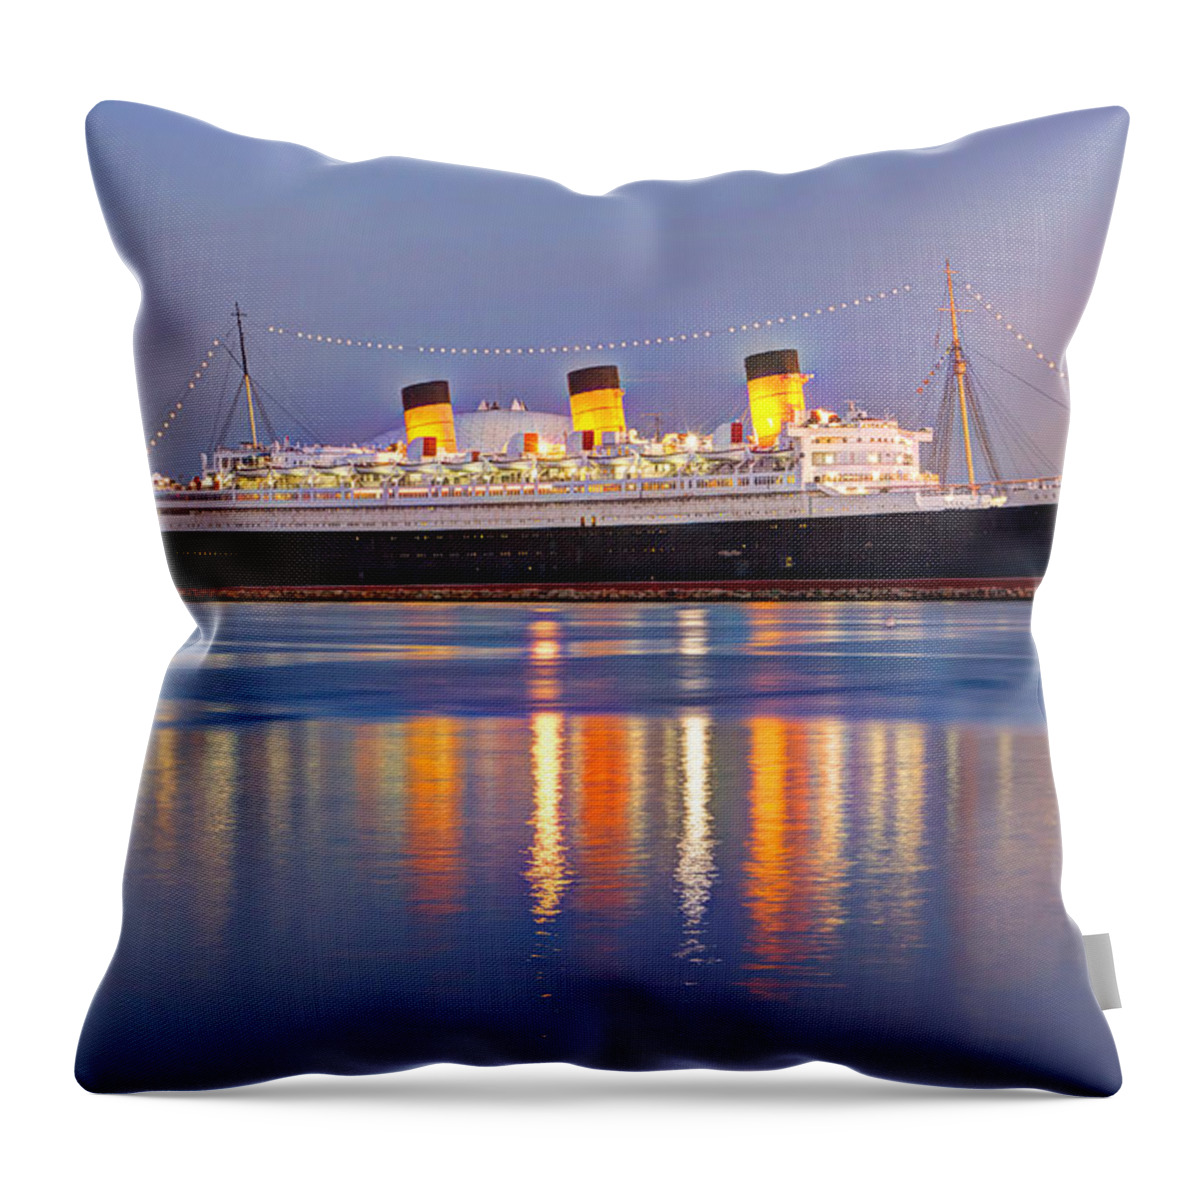 Atmosphere Throw Pillow featuring the photograph Dusk Light On The Queen Mary by Heidi Smith